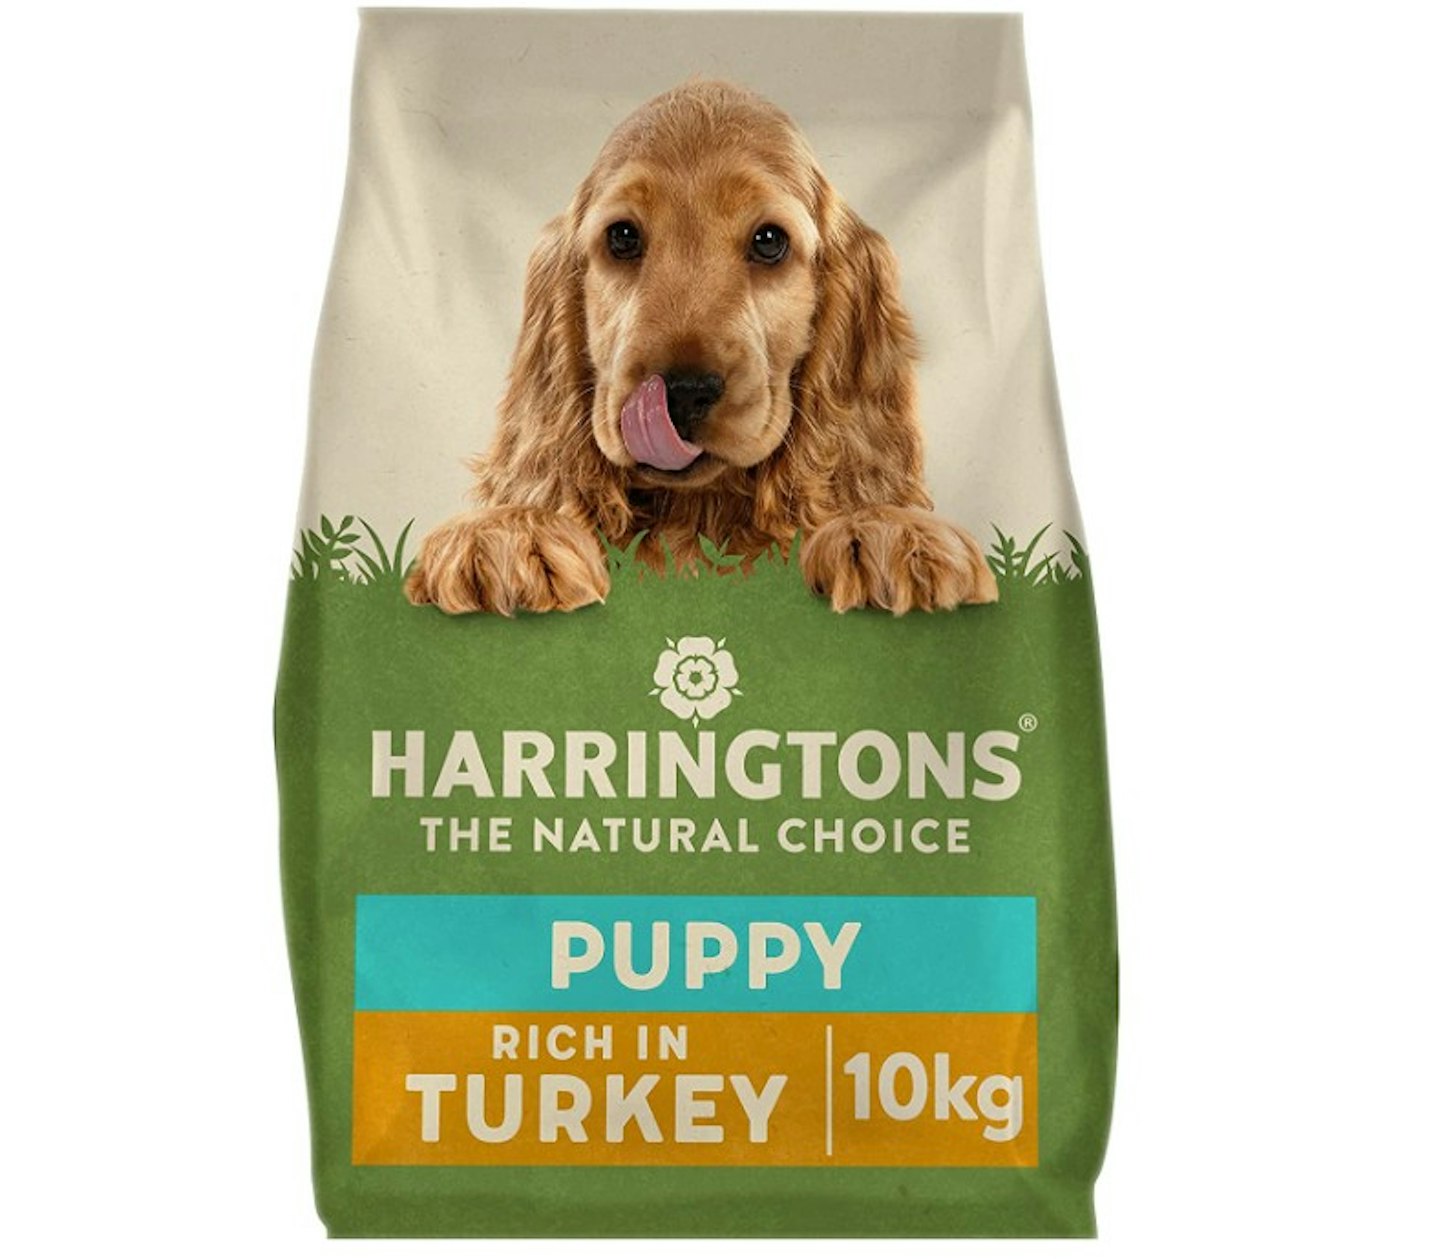  Harringtons Complete Dry Puppy Food Turkey & Rice 10kg - Made with All Natural Ingredients